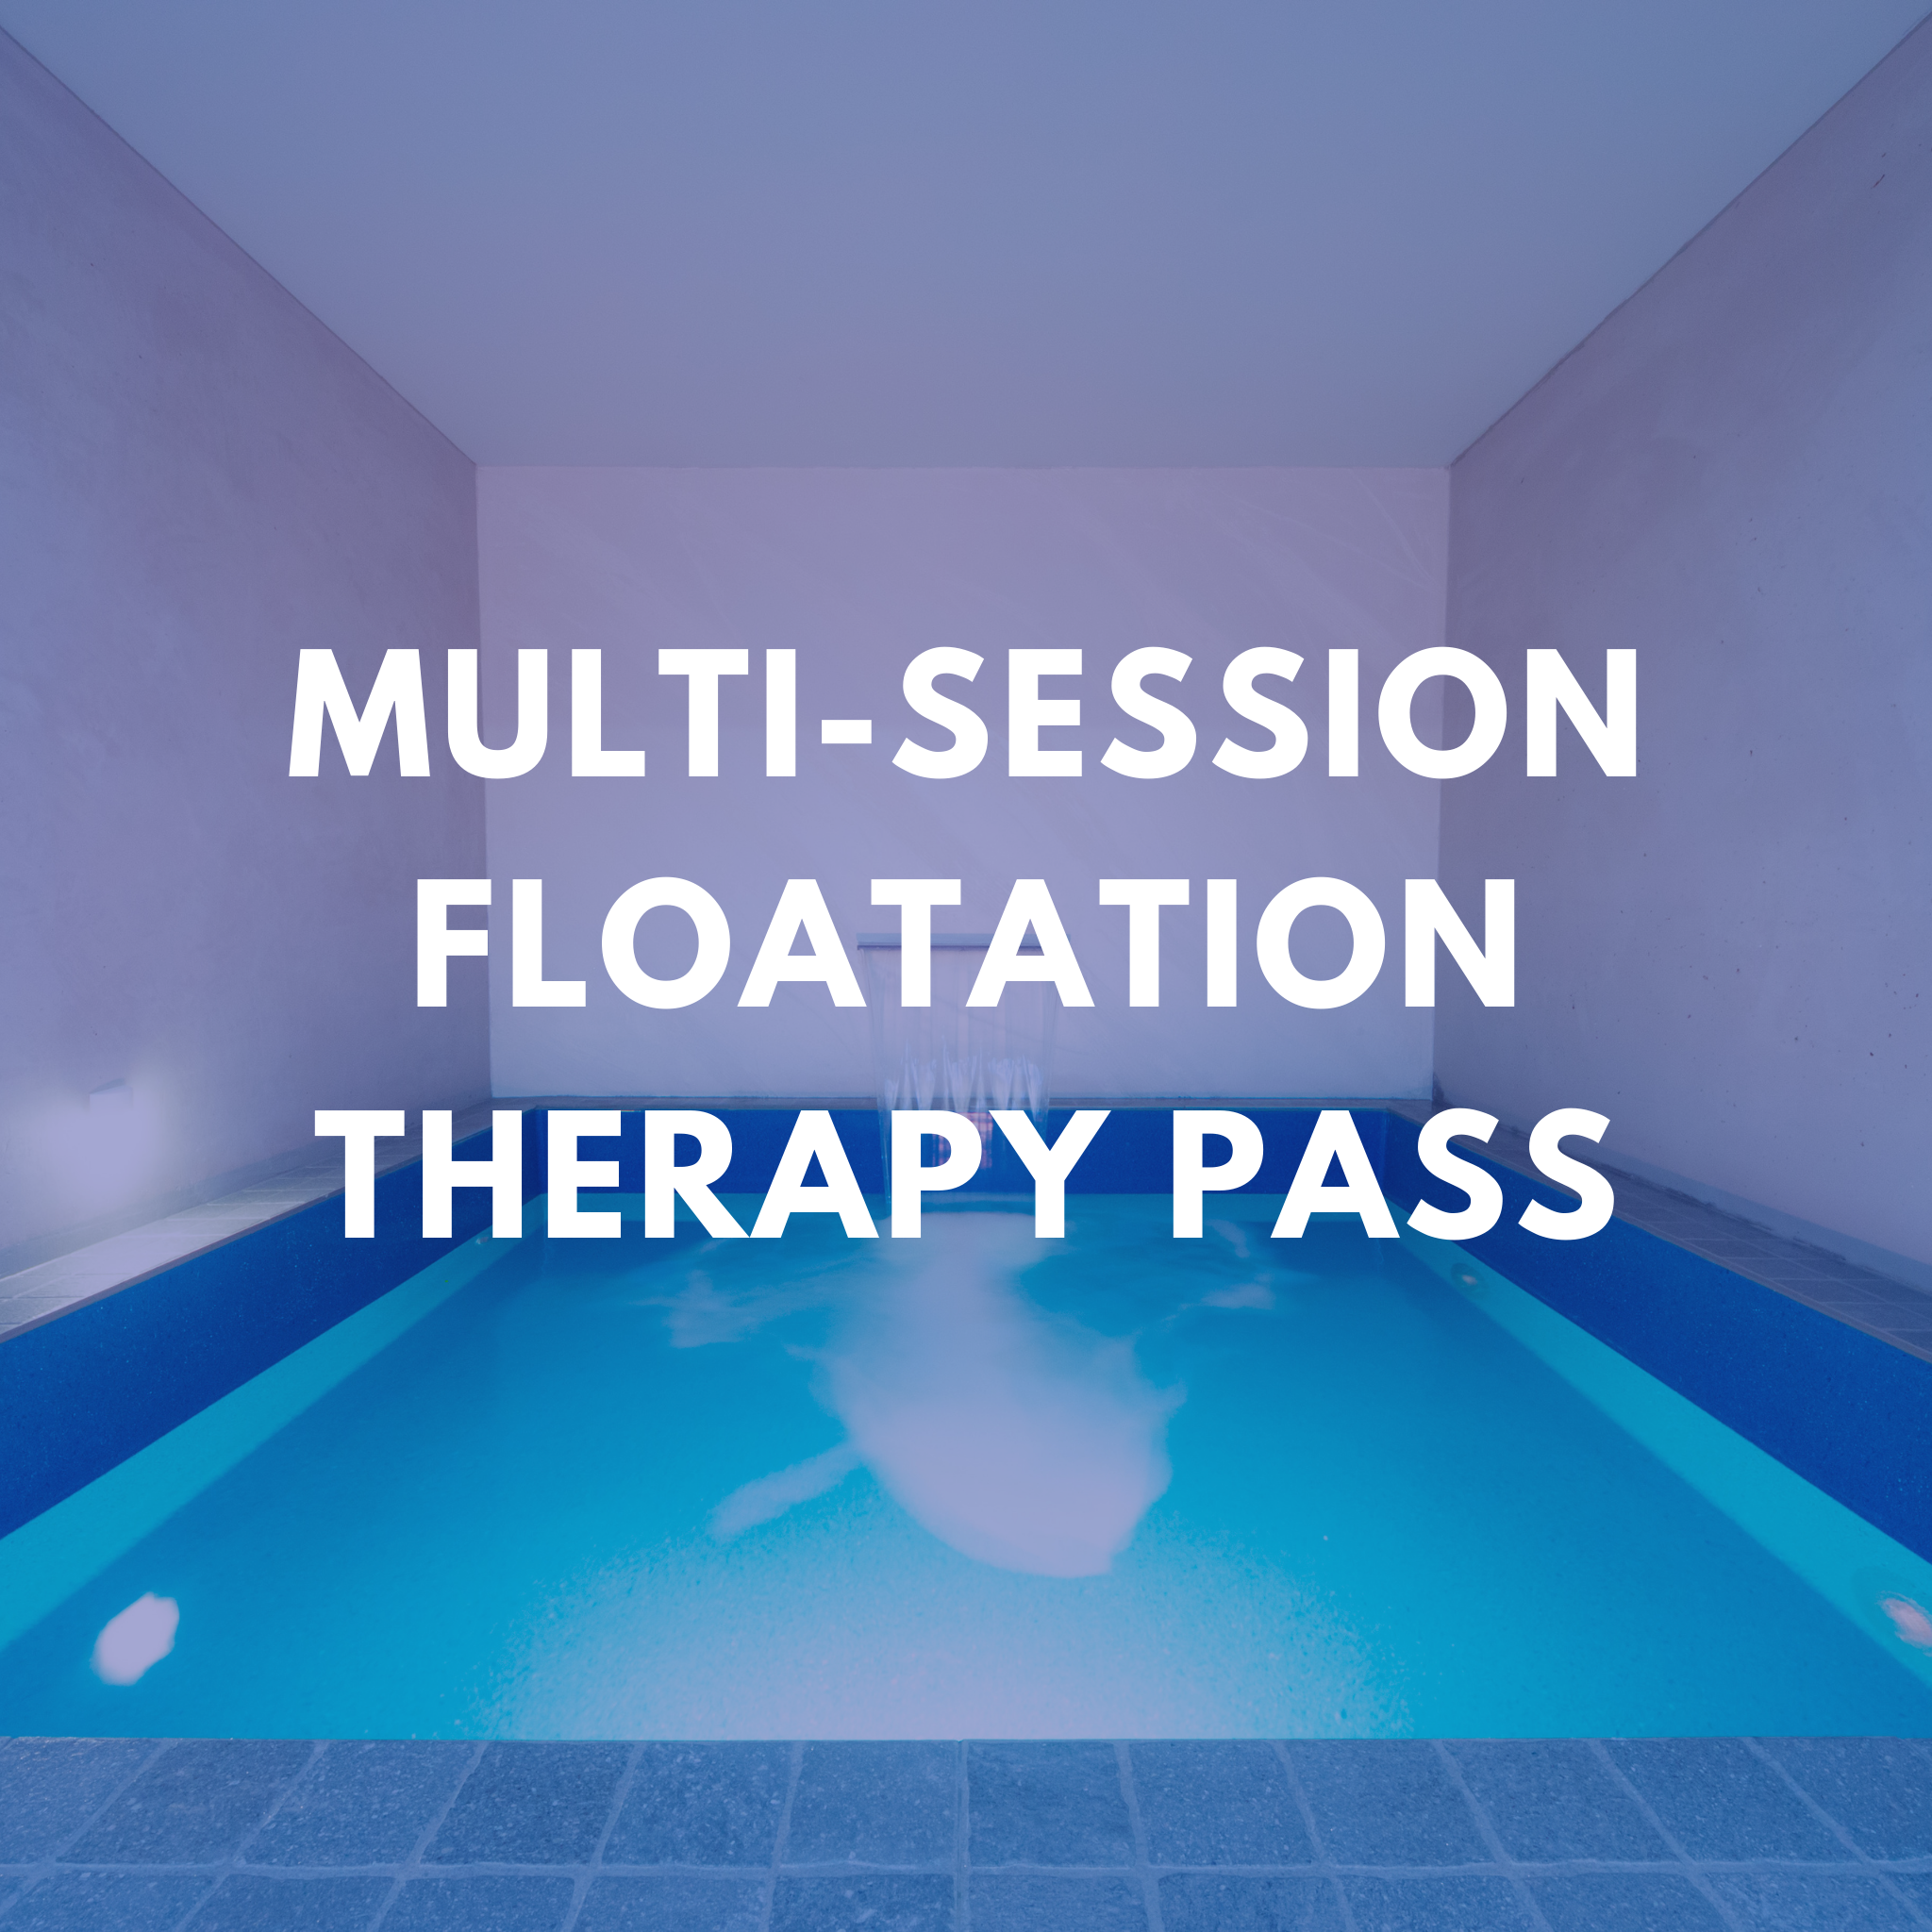 Multi-Session Floatation Therapy Pass